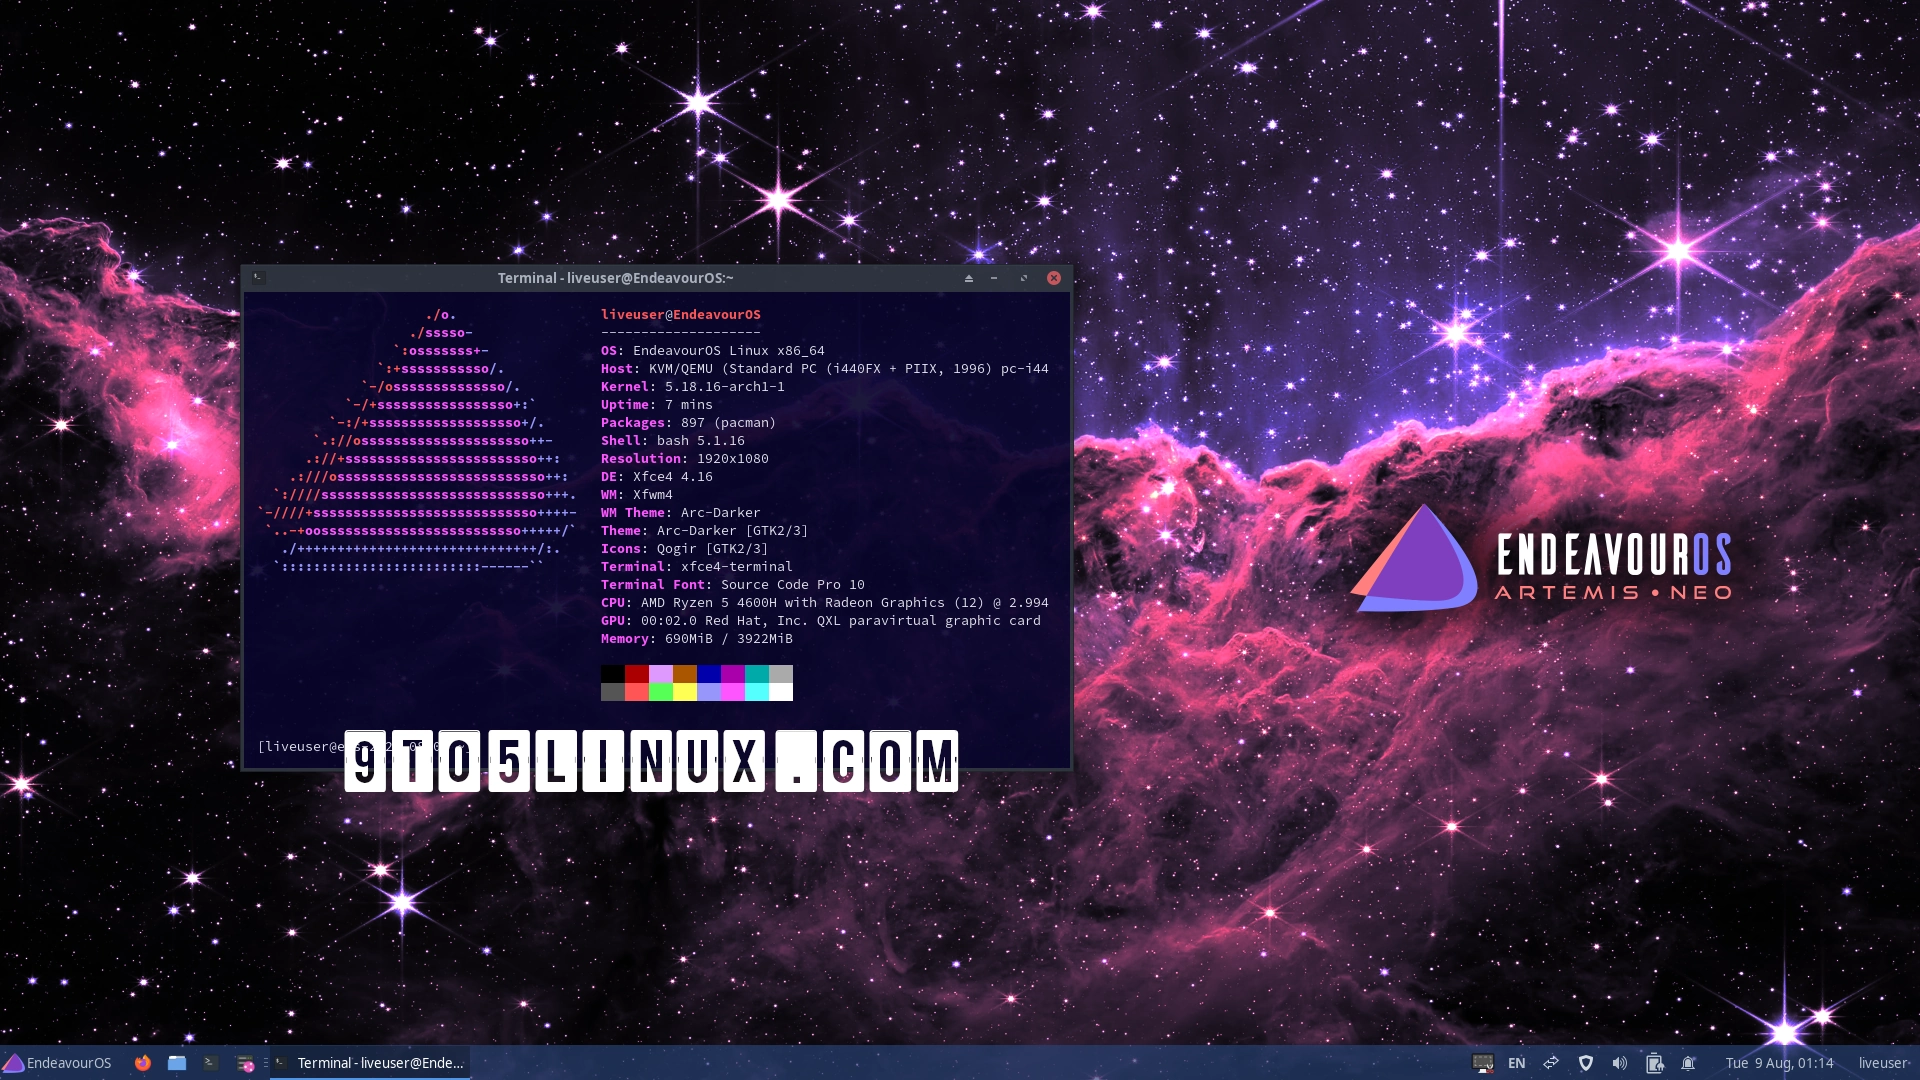 Arch Linux-Based EndeavourOS Artemis Neo Is Now Available as a Minor Update